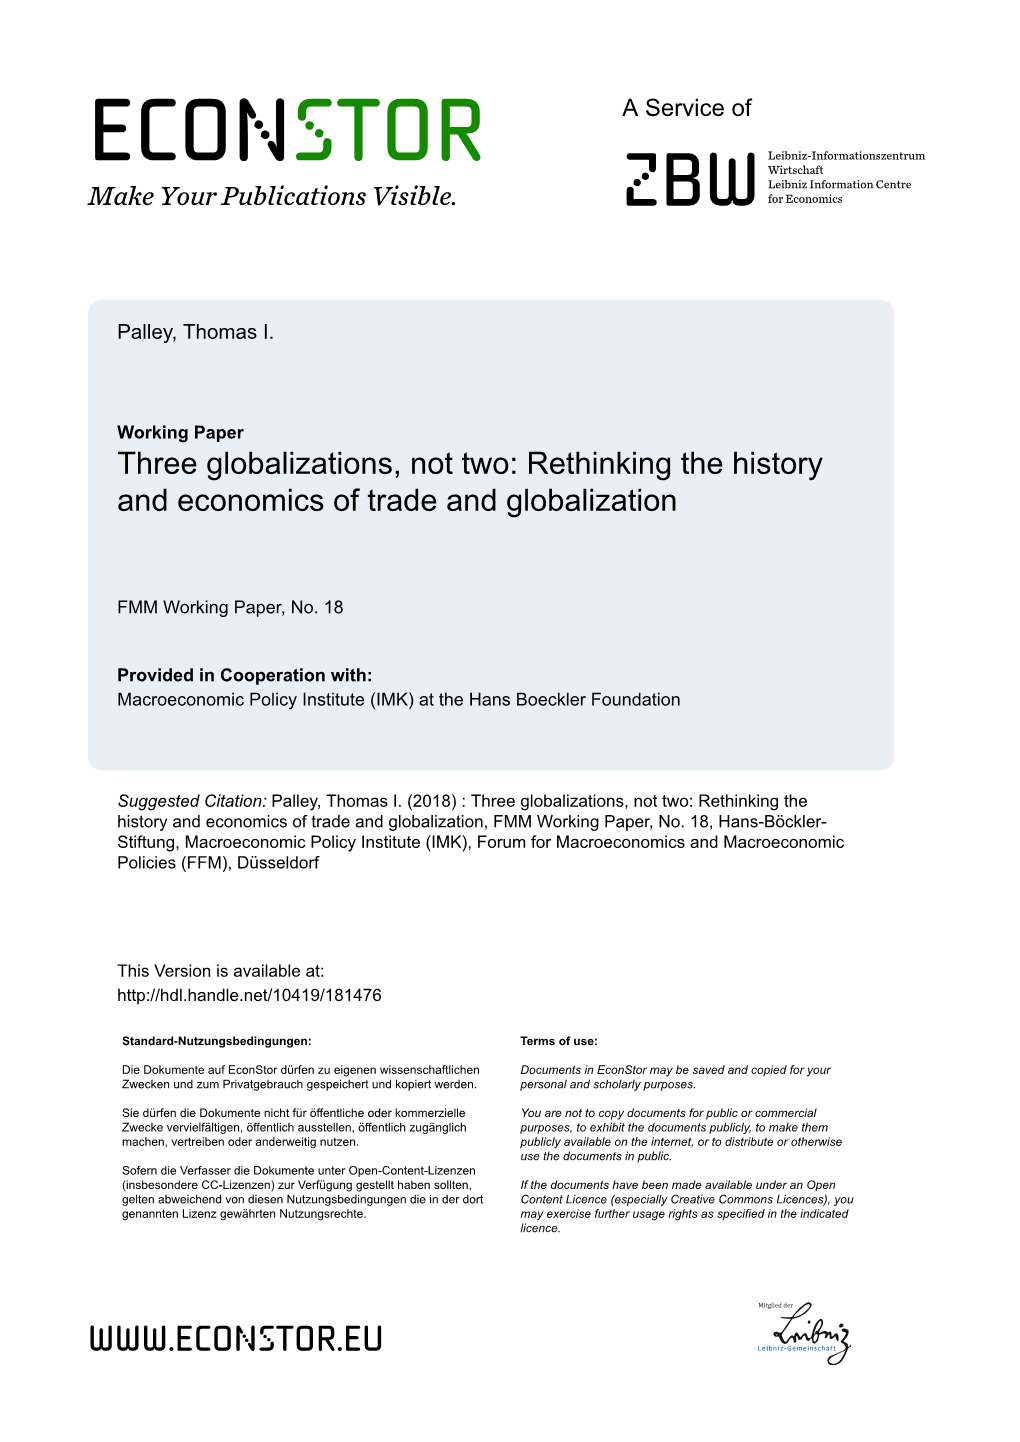 Rethinking the History and Economics of Trade and Globalization